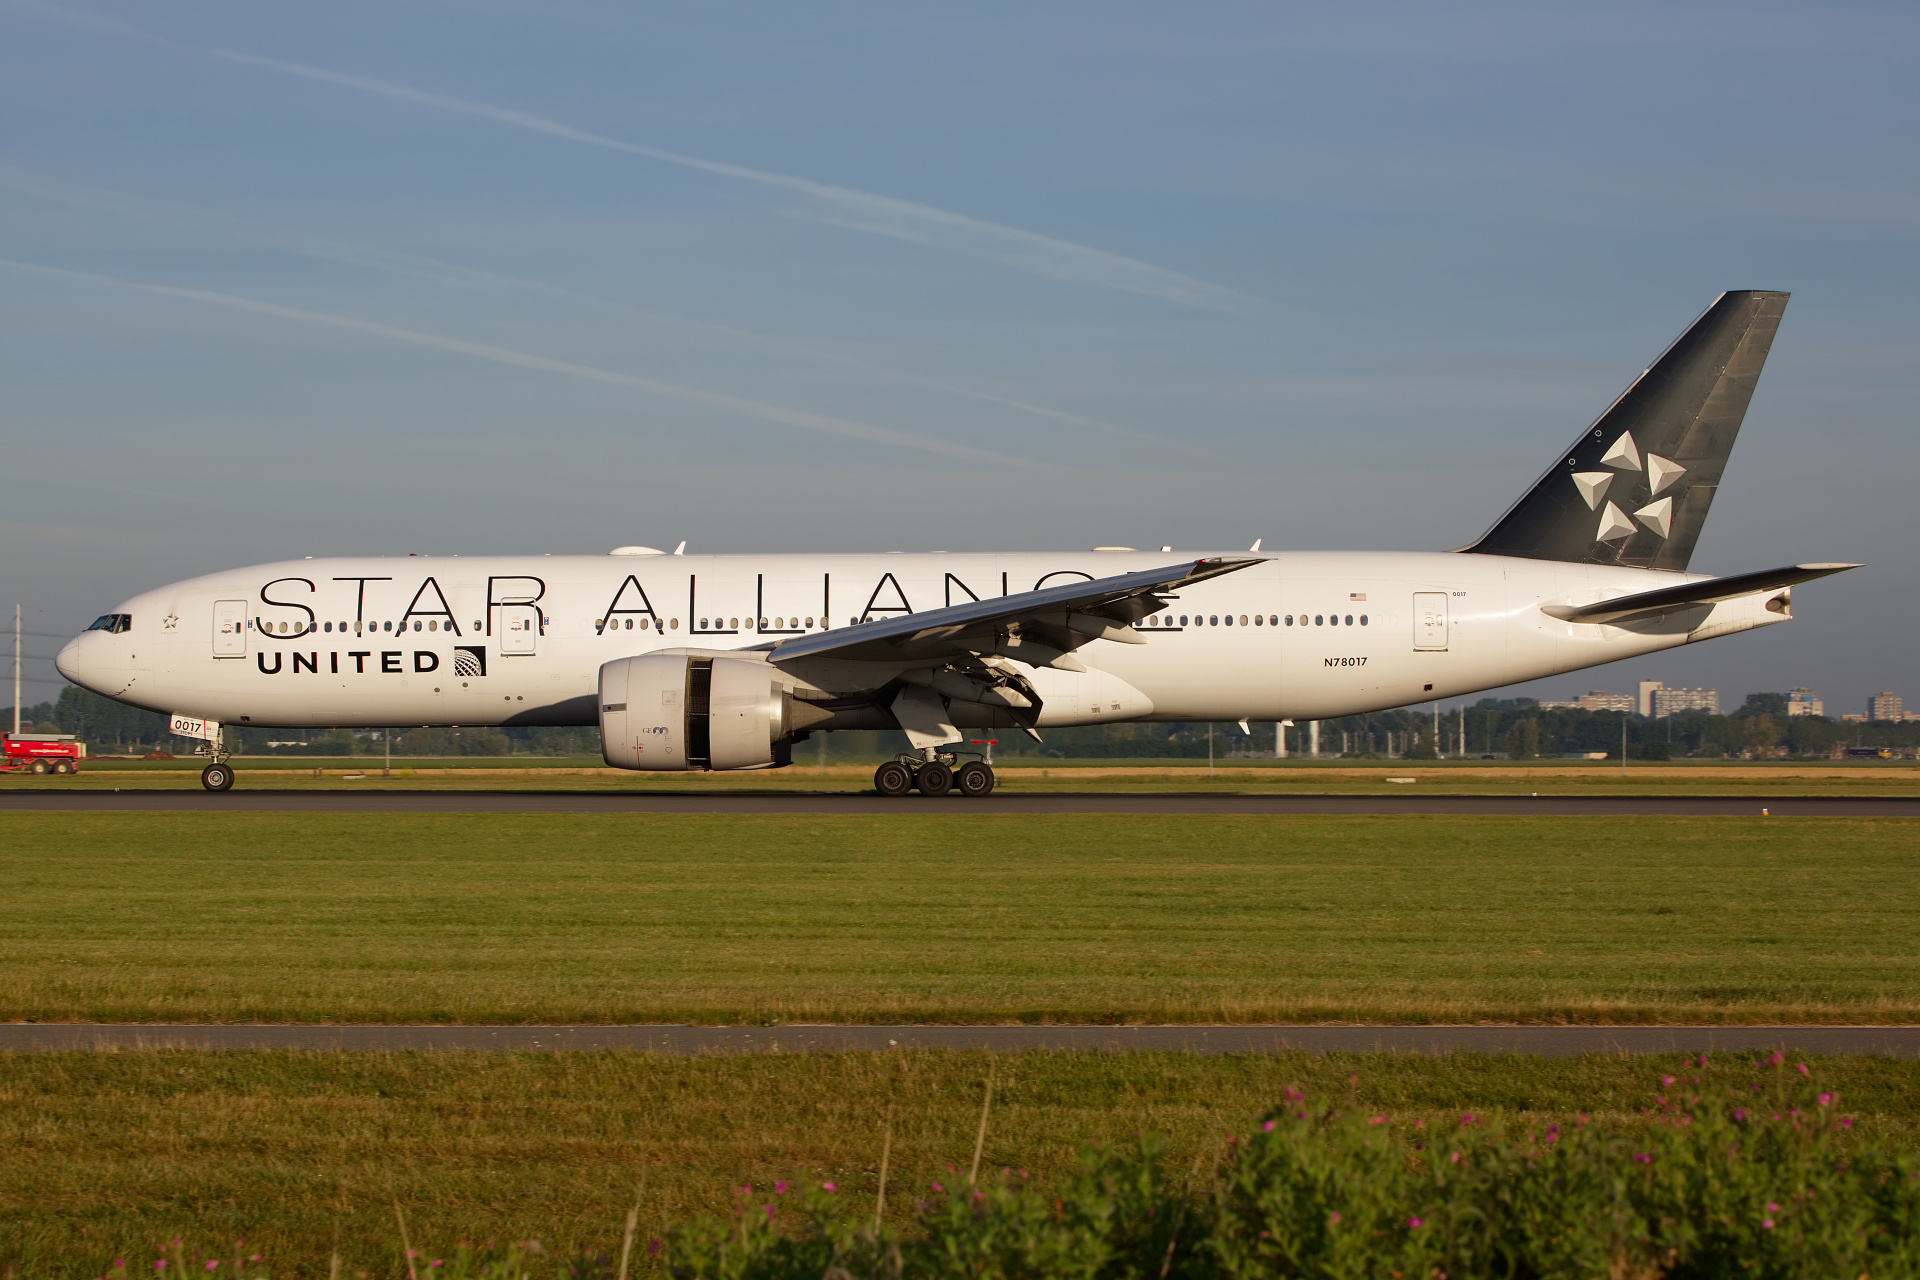 N78017 (Star Alliance livery) (Aircraft » Schiphol Spotting » Boeing 777-200/-ER » United Airlines)